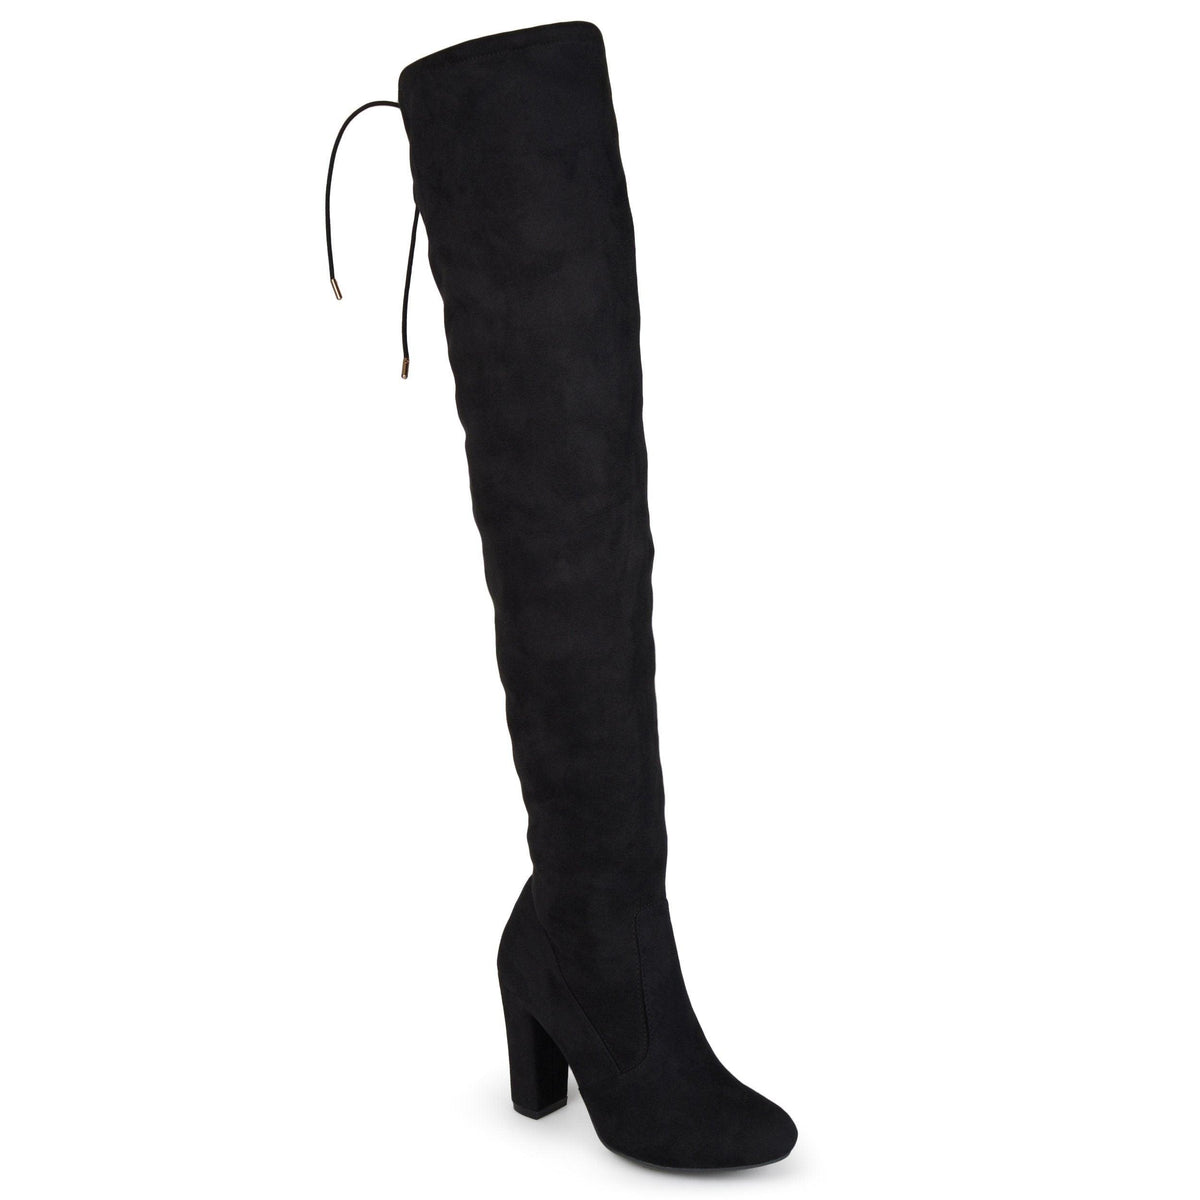 Maya Boots | Women's Over The Knee Boots | Journee Collection